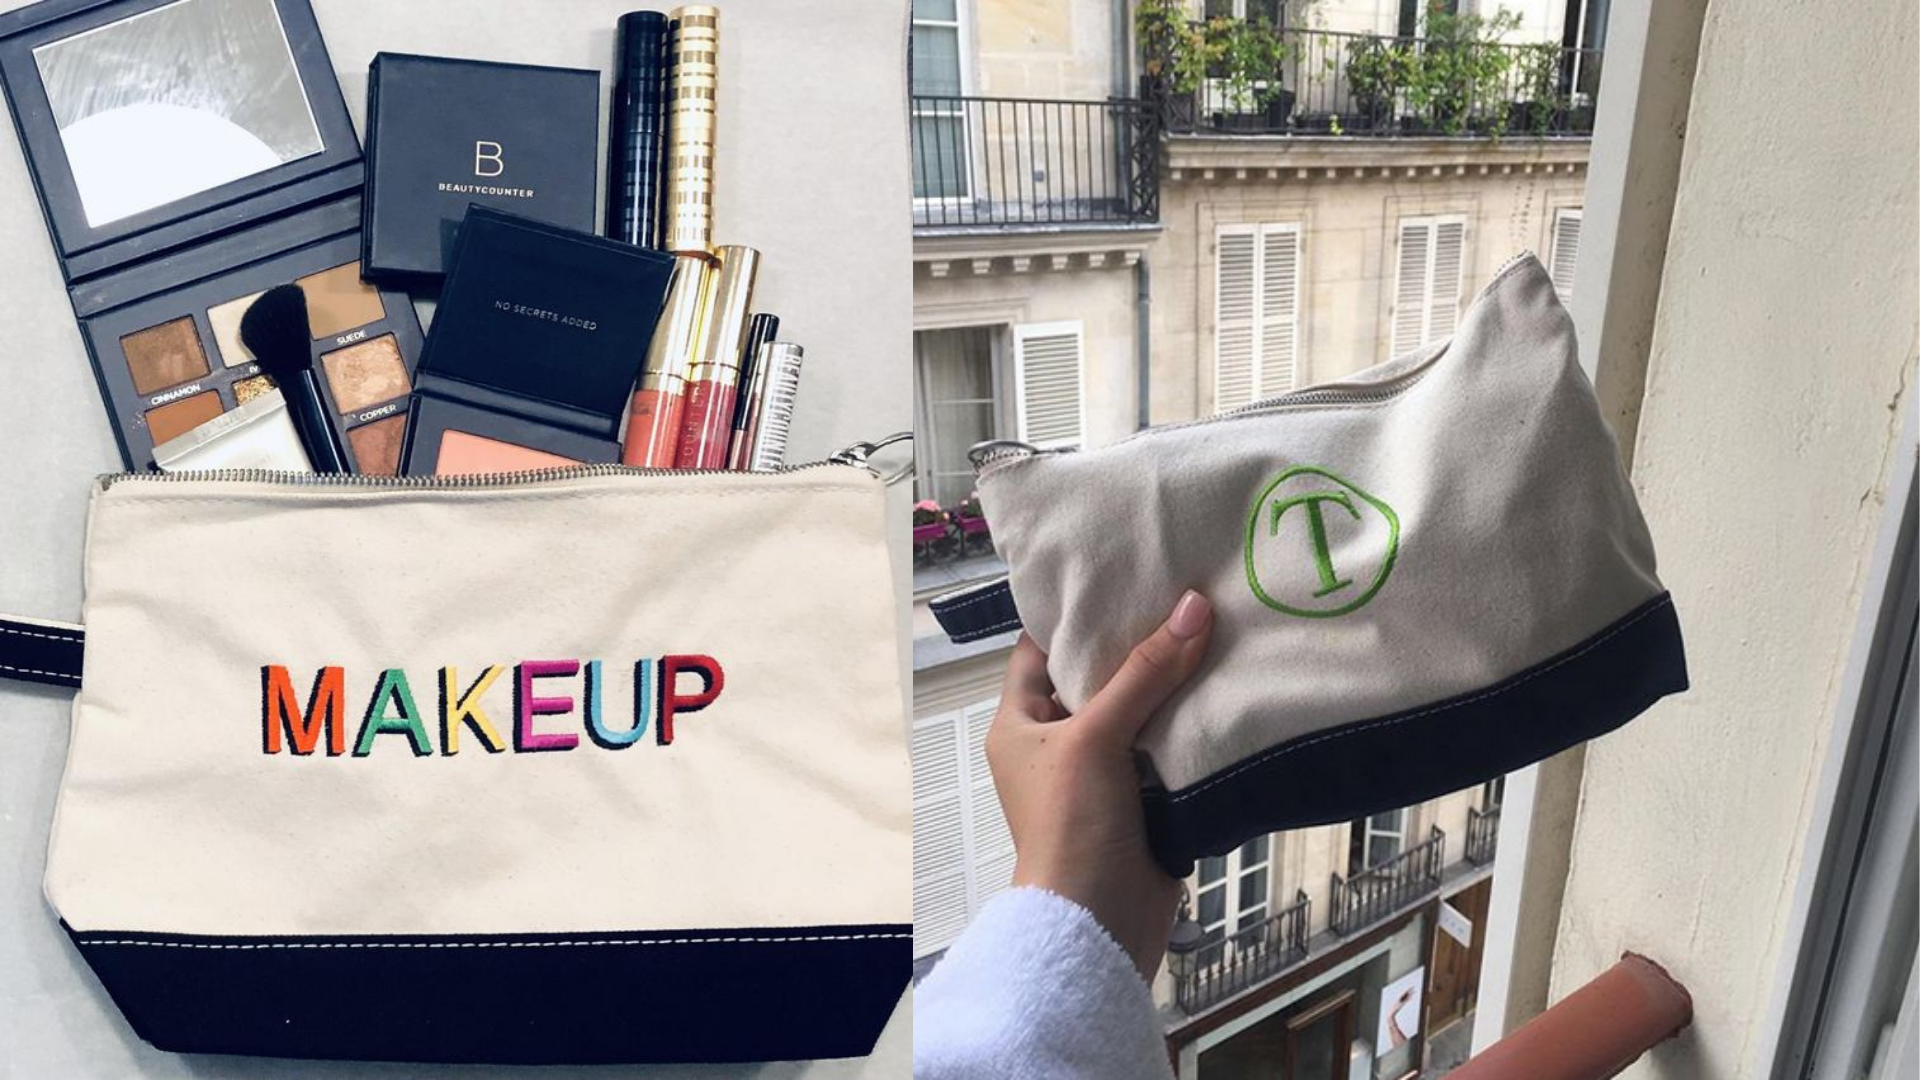 Are your tote bags branded? If not, what's holding you back from